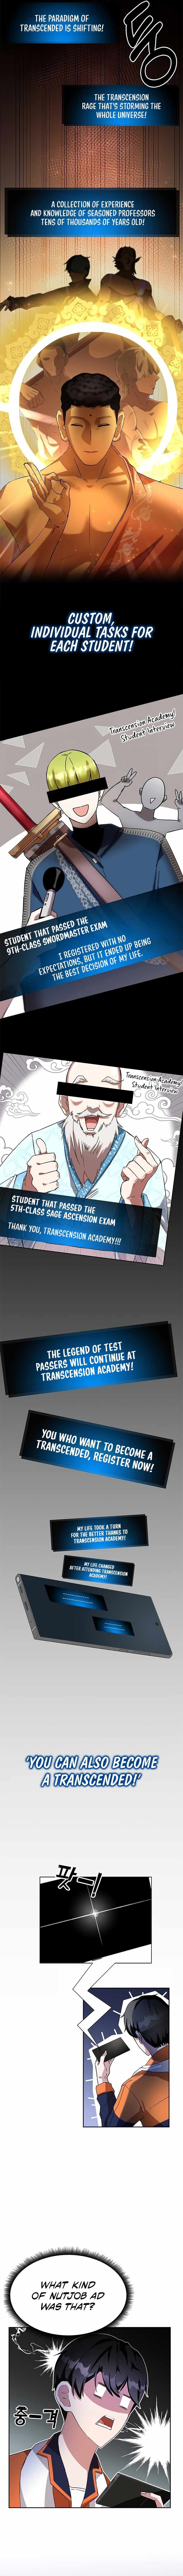 Transcension Academy Chapter 1 page 5